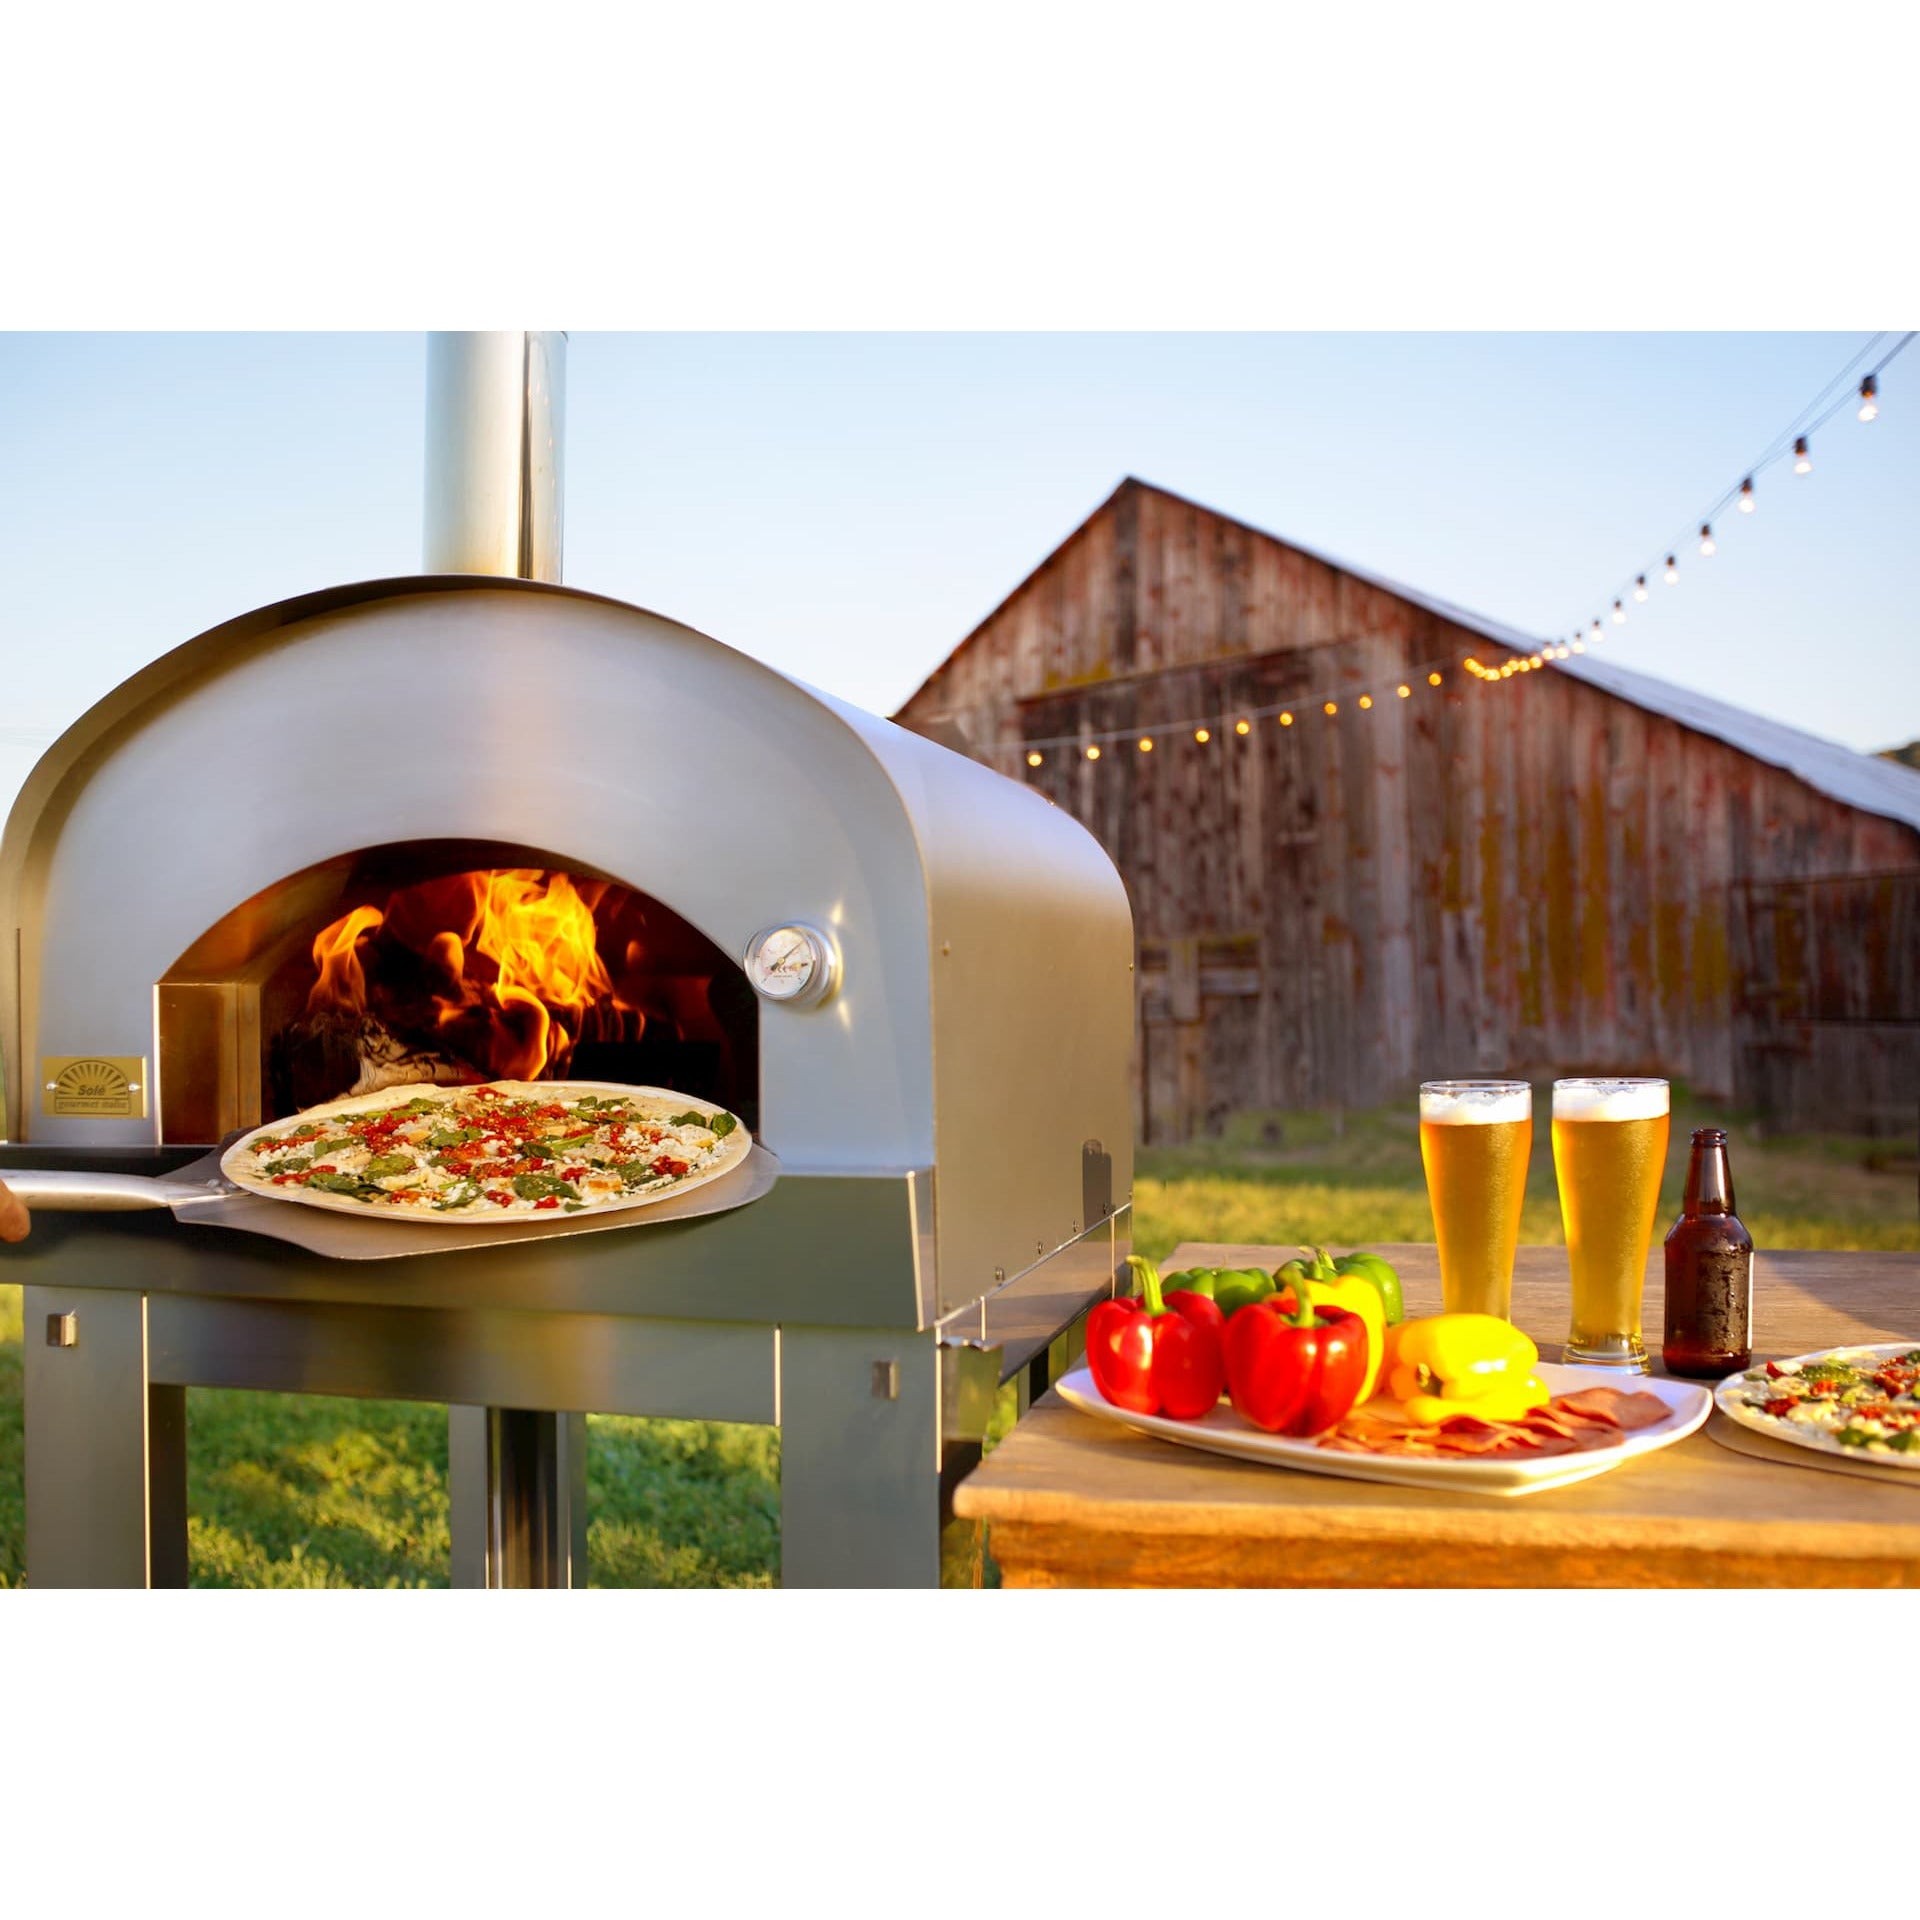 Solé Gourmet 24 Inch Italia Wood Fired Oven LifeStyle